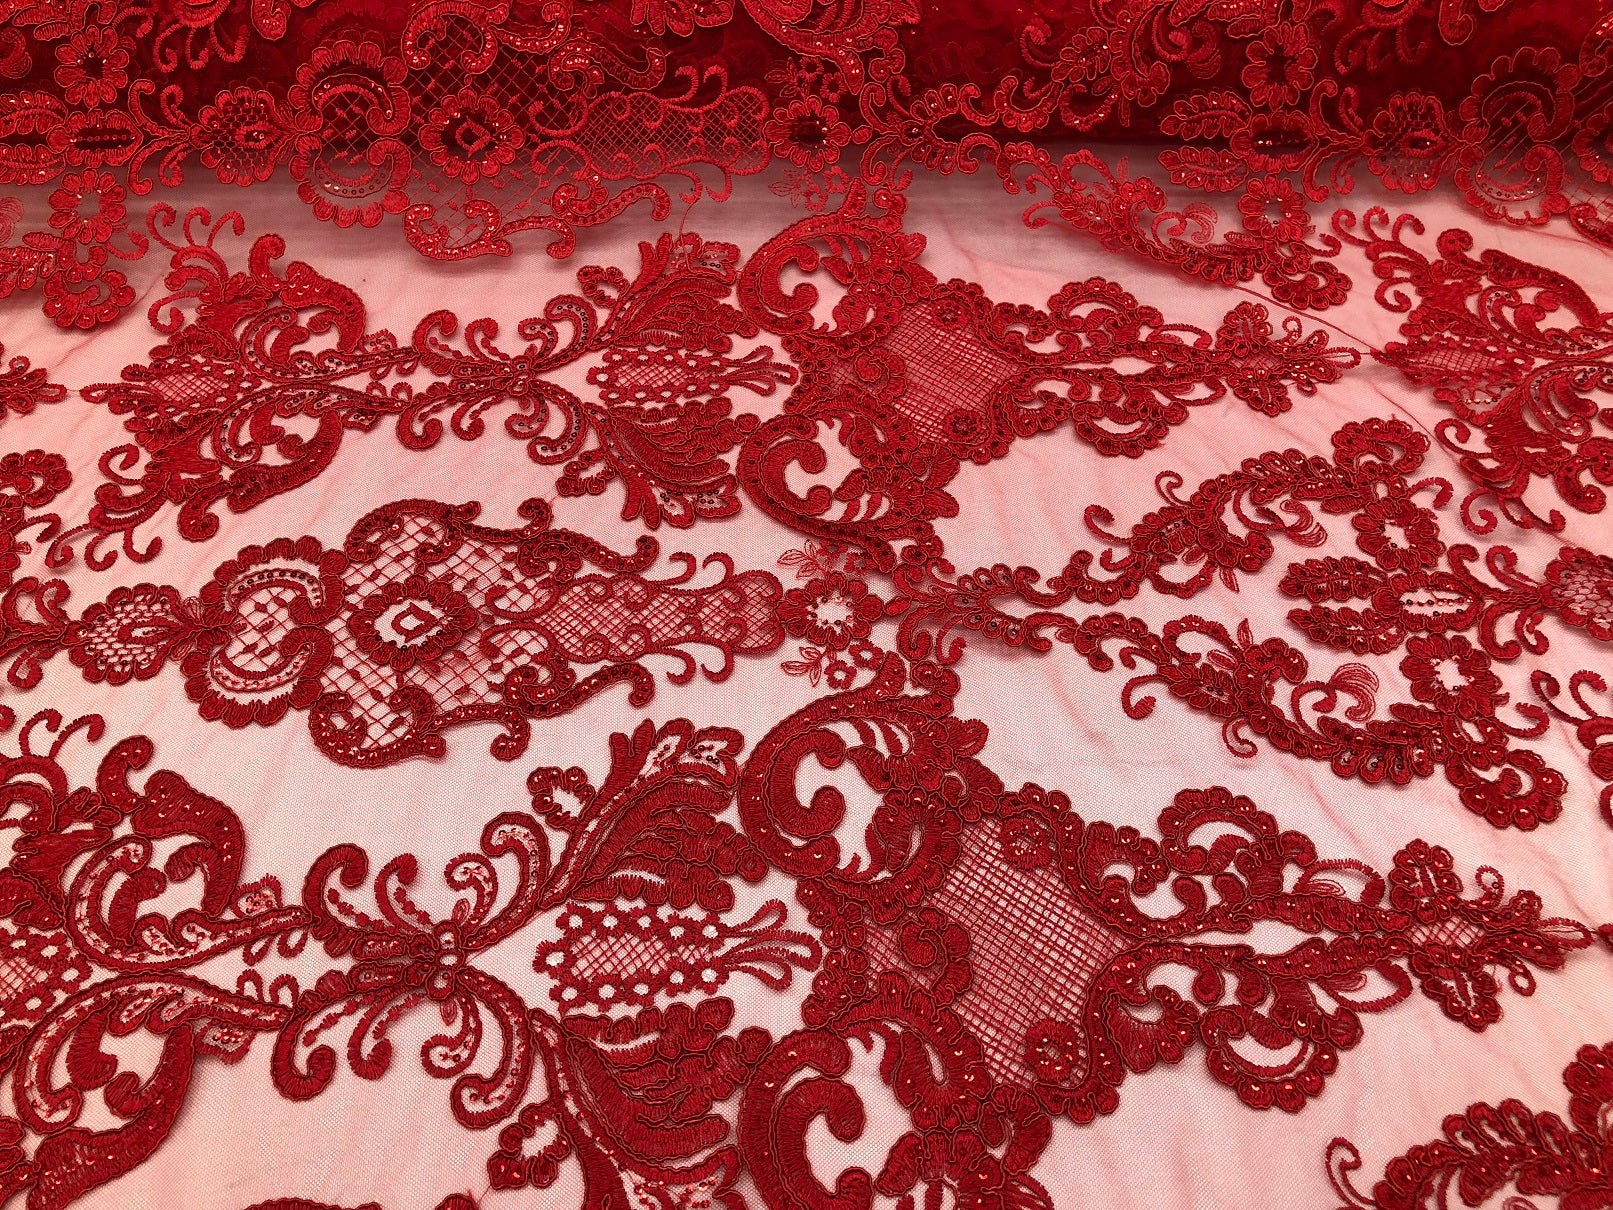 Floral - Red - Embroided Lace Fabric Damask Pattern - Beautiful Fabric ...